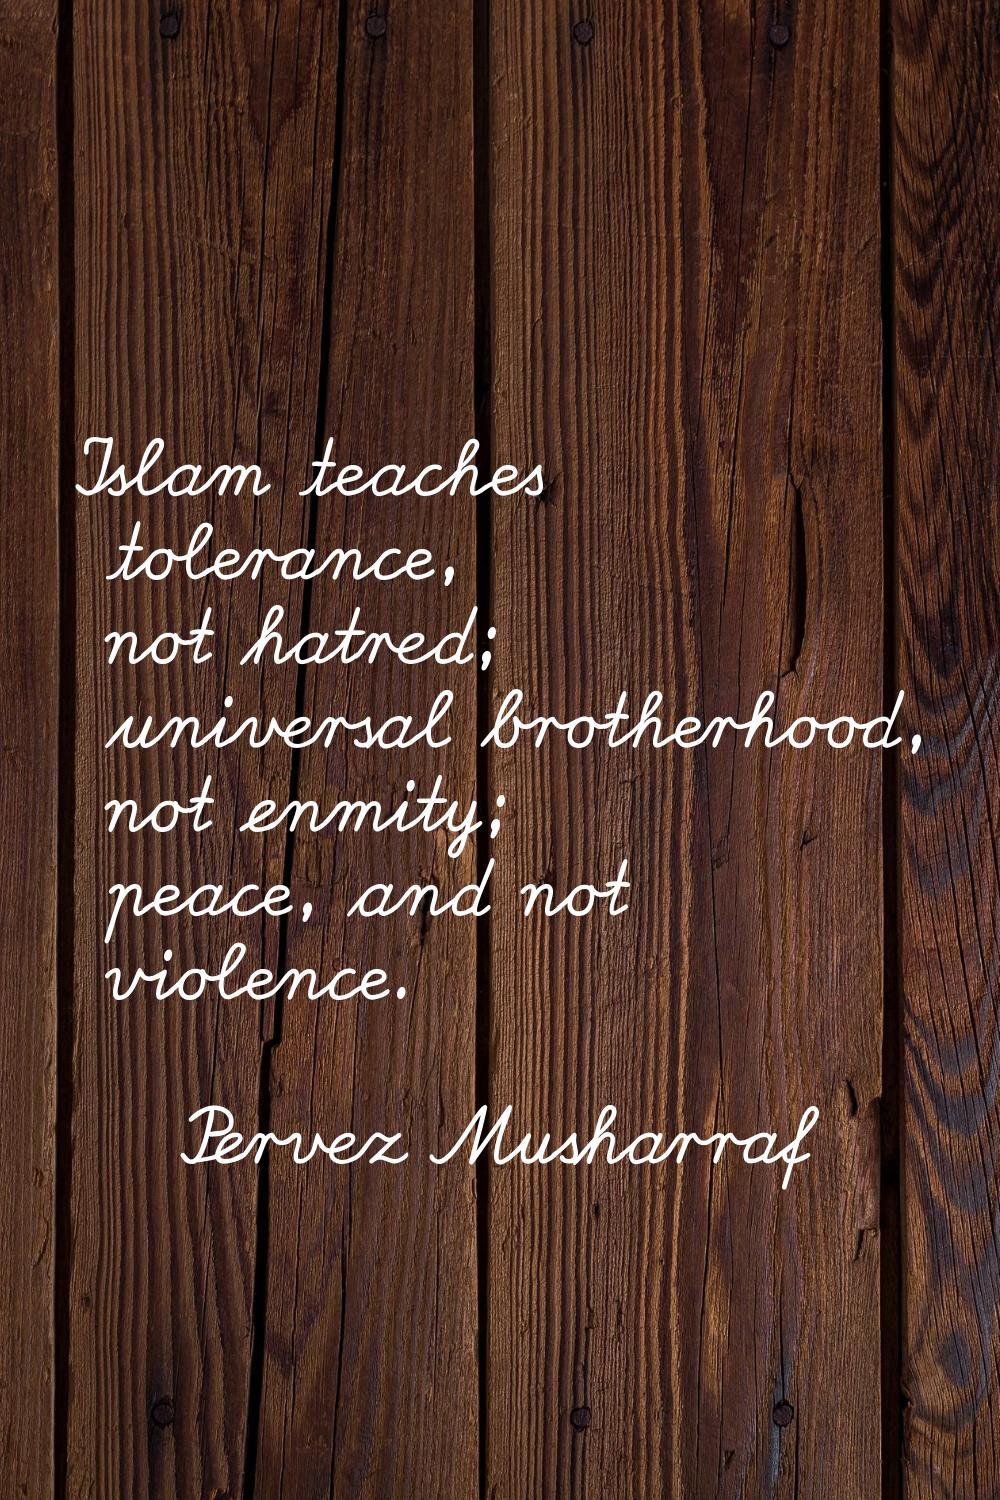 Islam teaches tolerance, not hatred; universal brotherhood, not enmity; peace, and not violence.